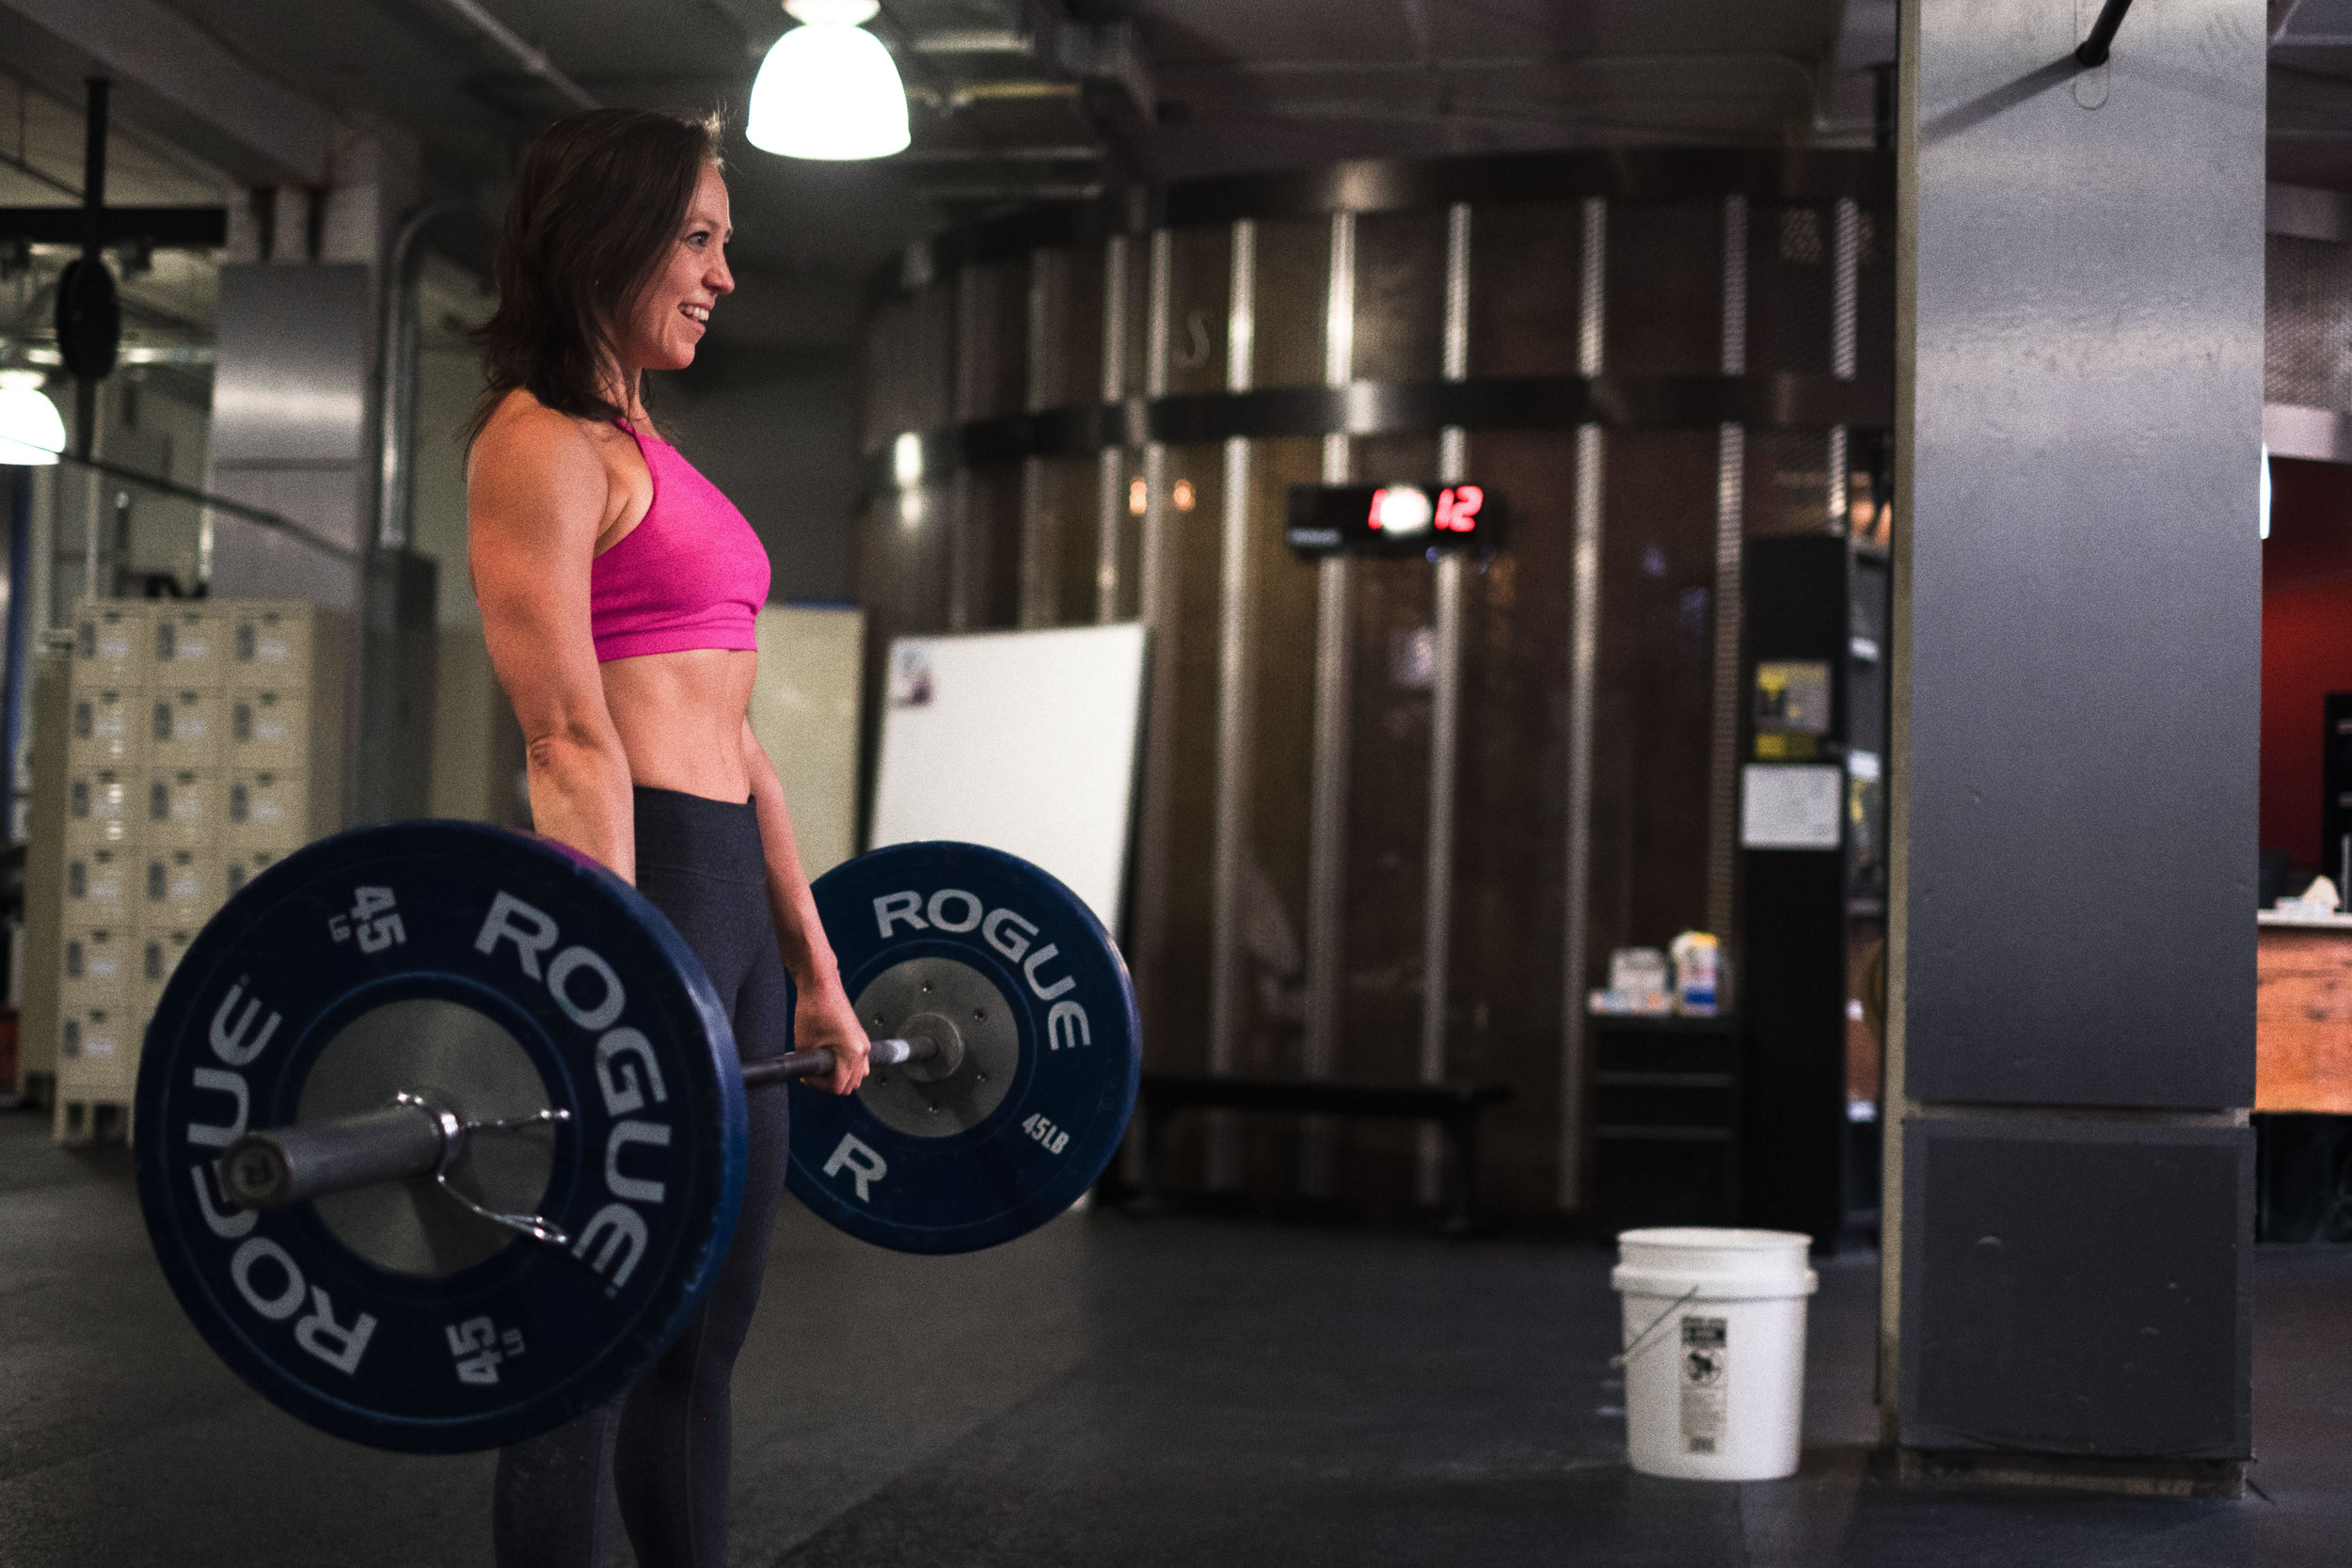 Topless girls weightlifting